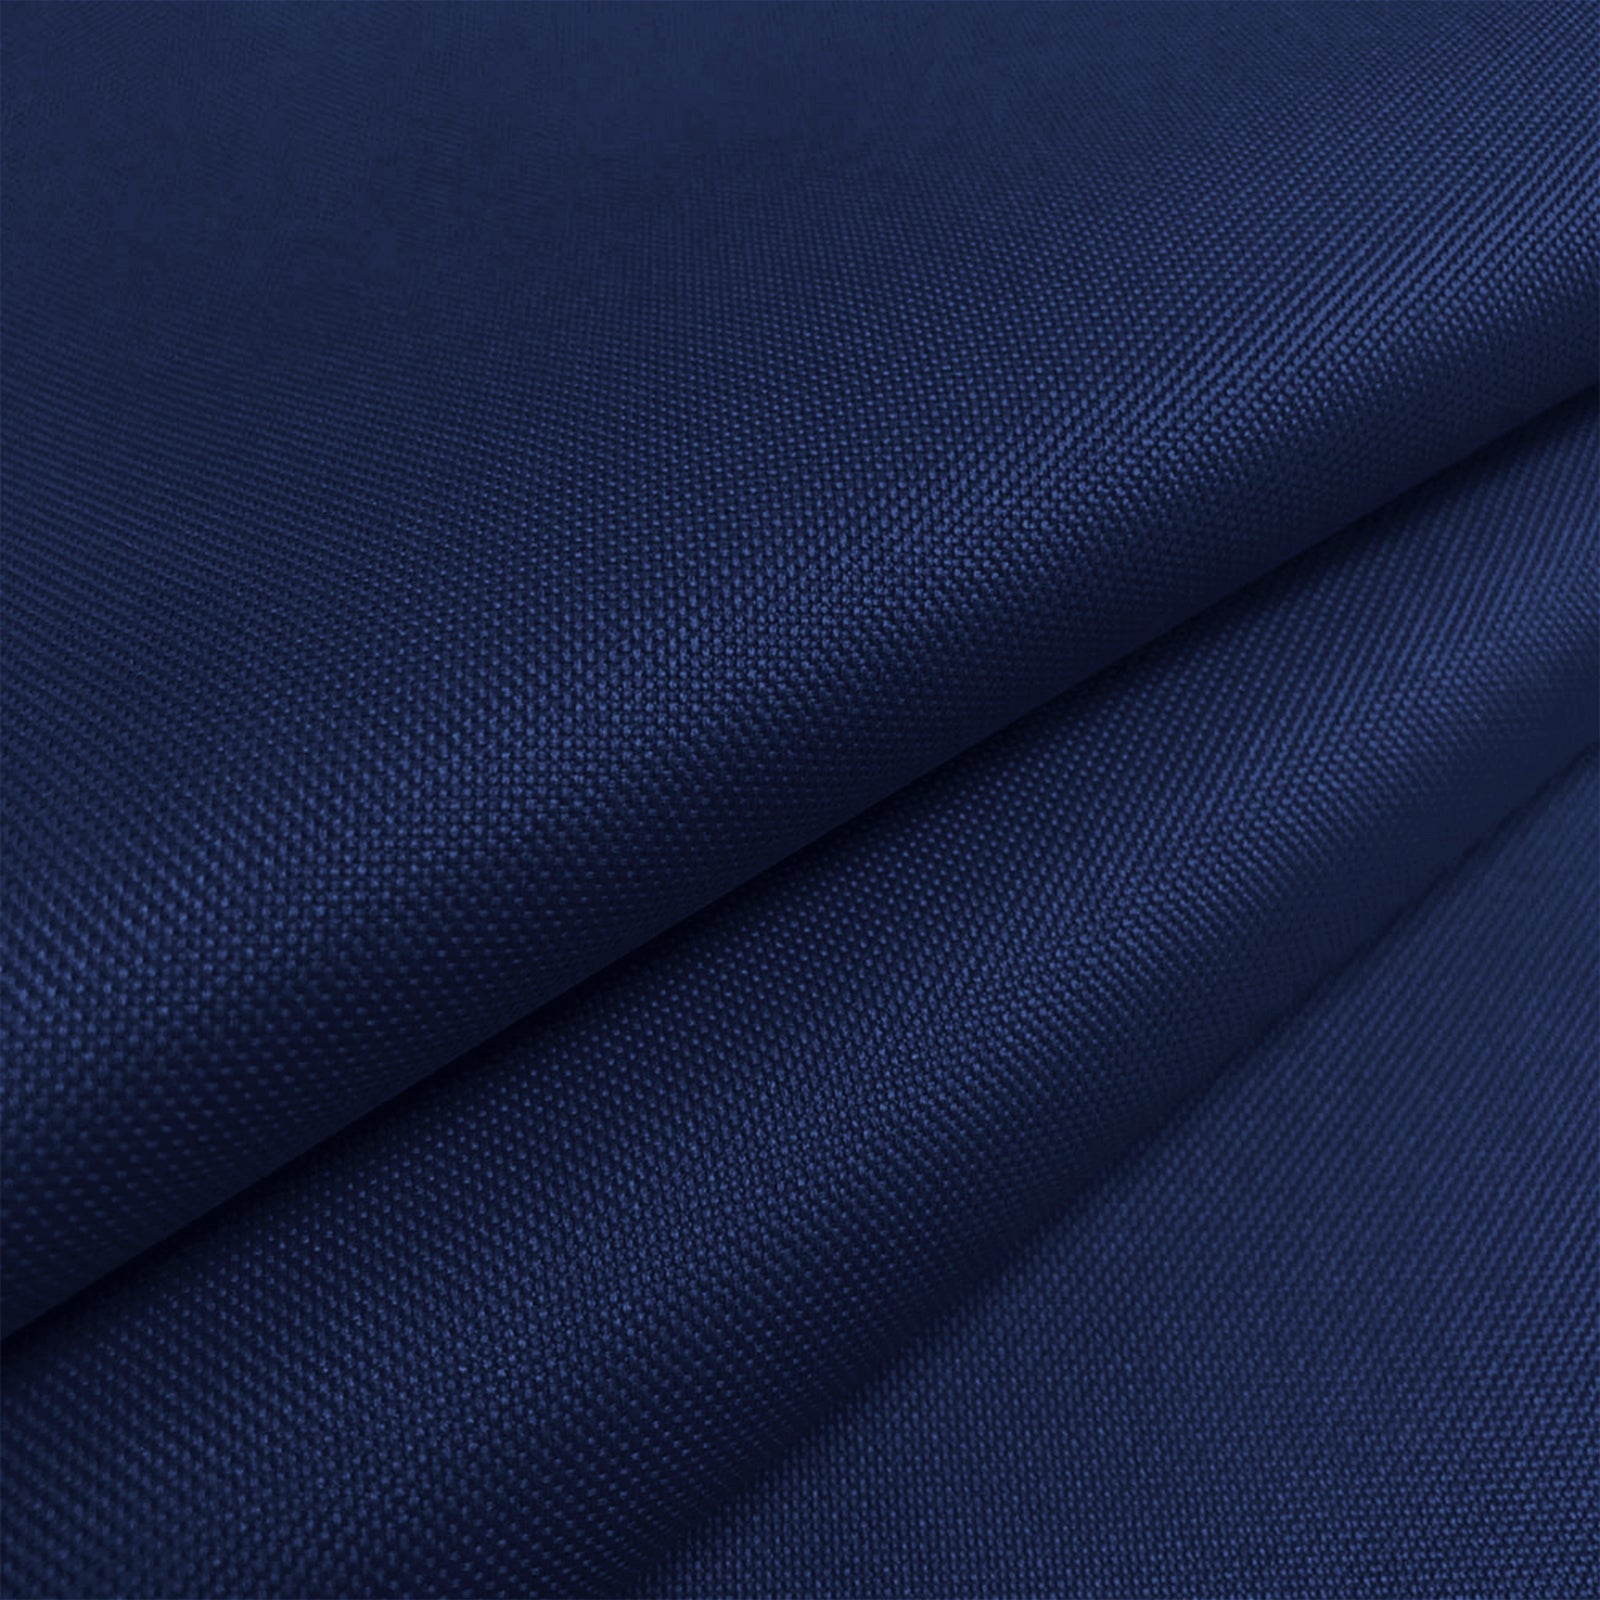 600D Polyester Fabric - Navy